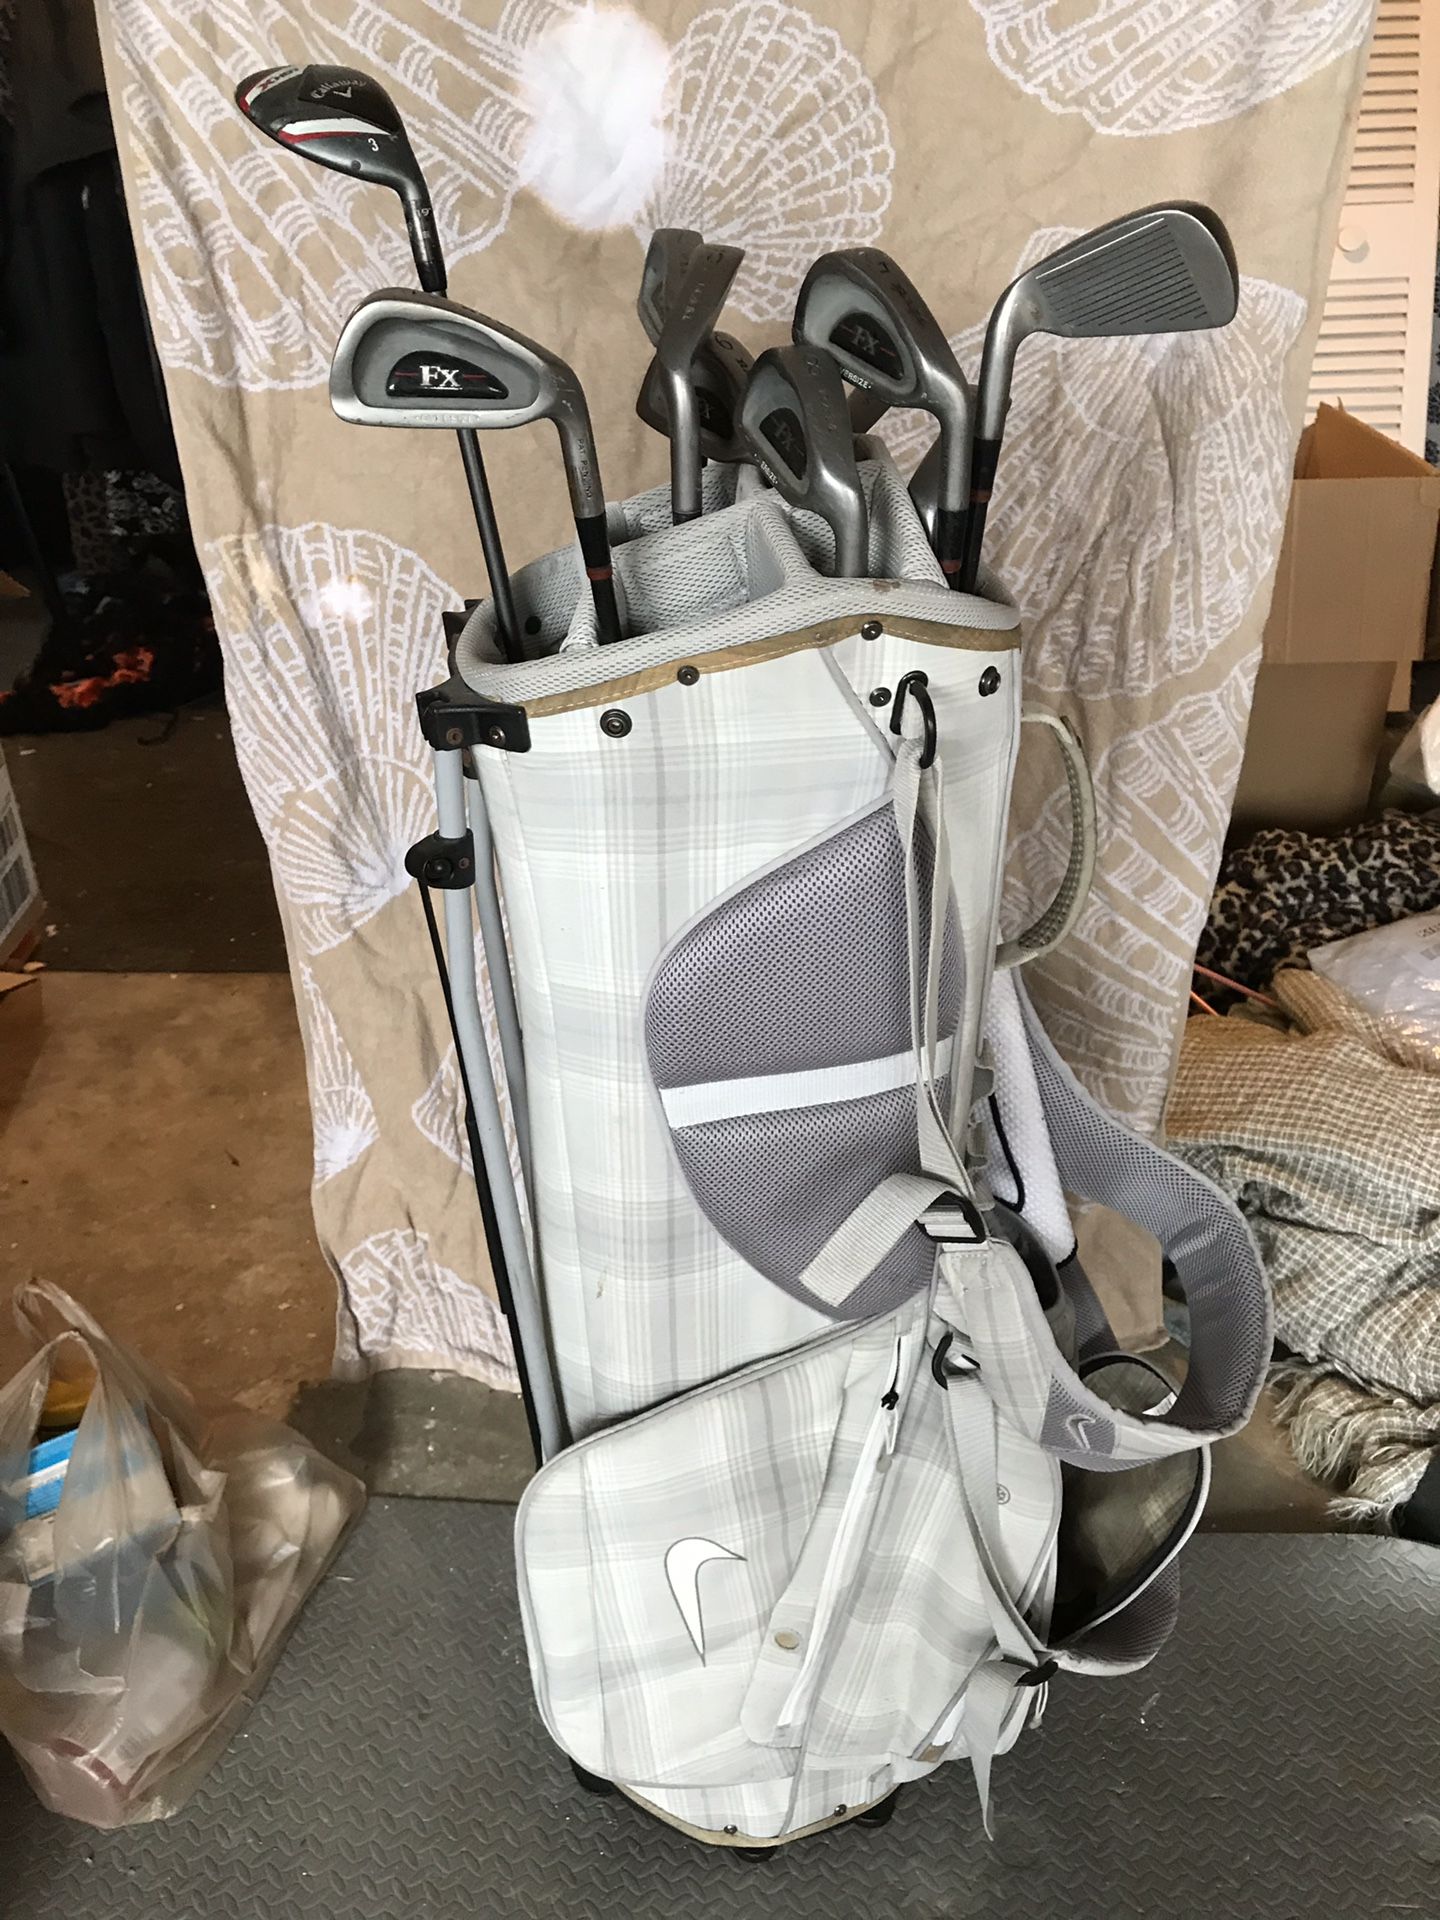 Nike golf bag with set of fx clubs